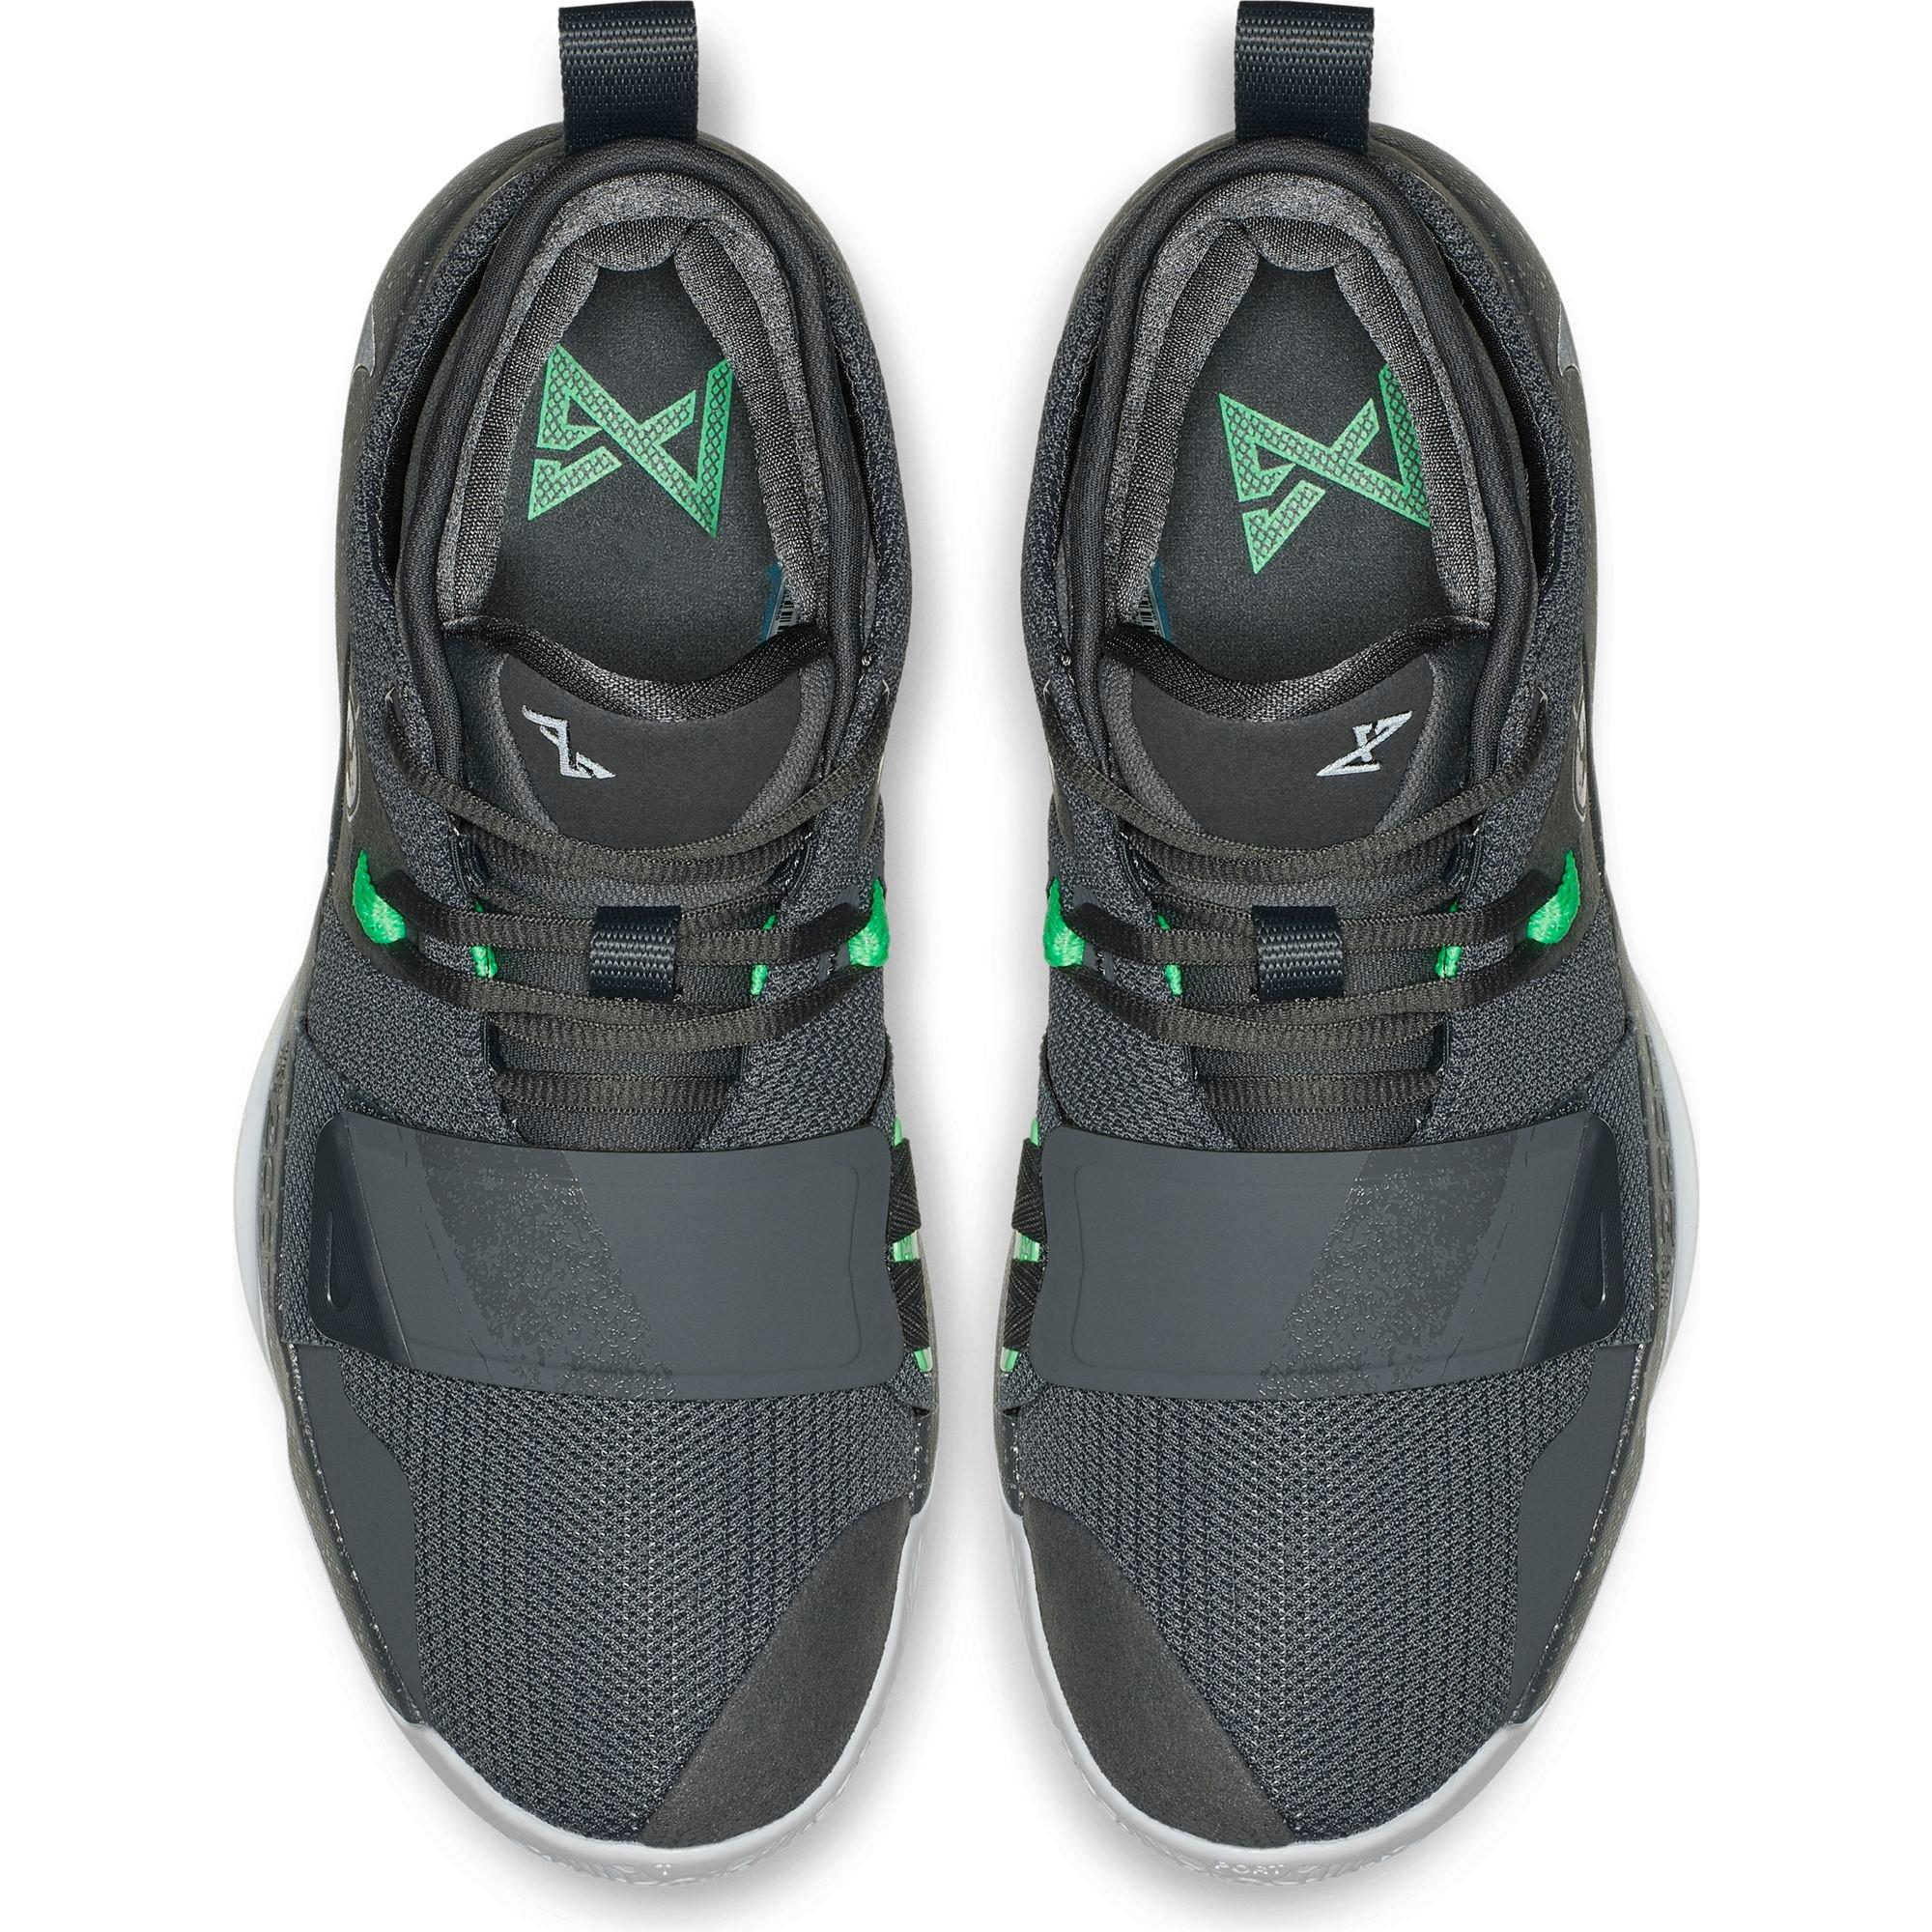 pg 2 grey and green